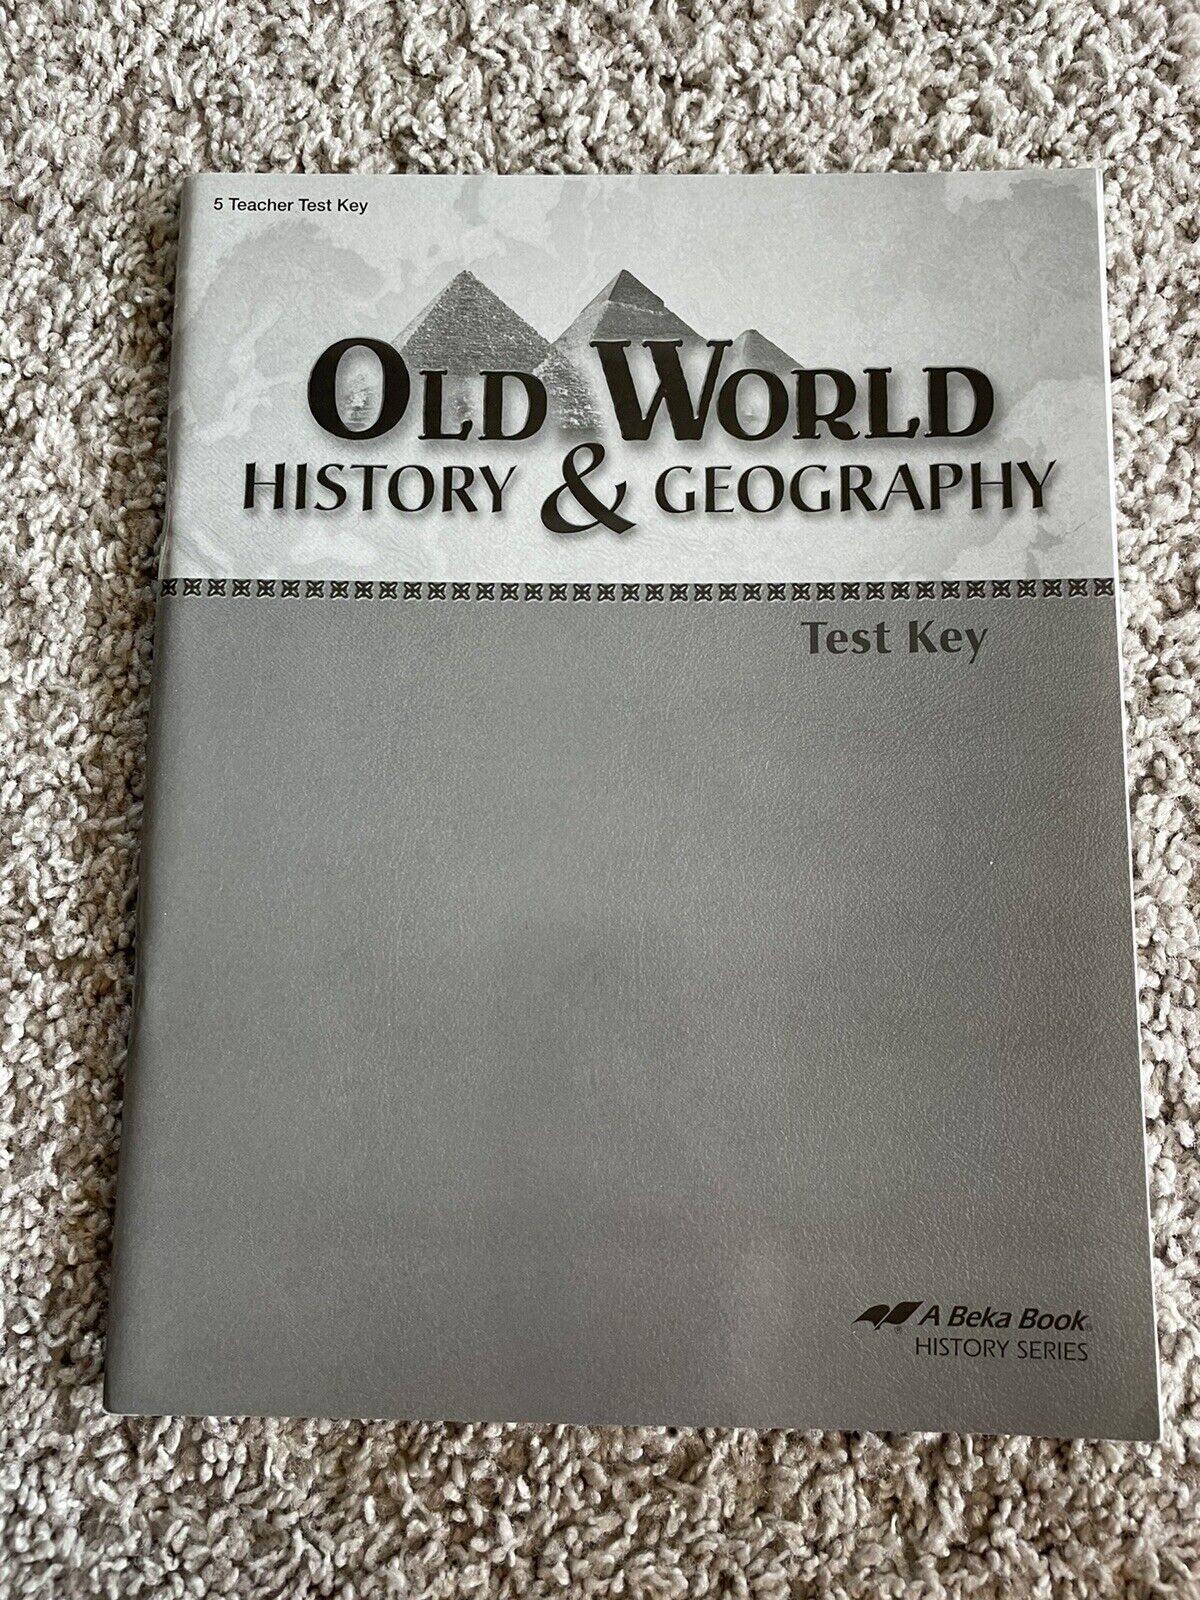 Old World History and Geography - Test Key